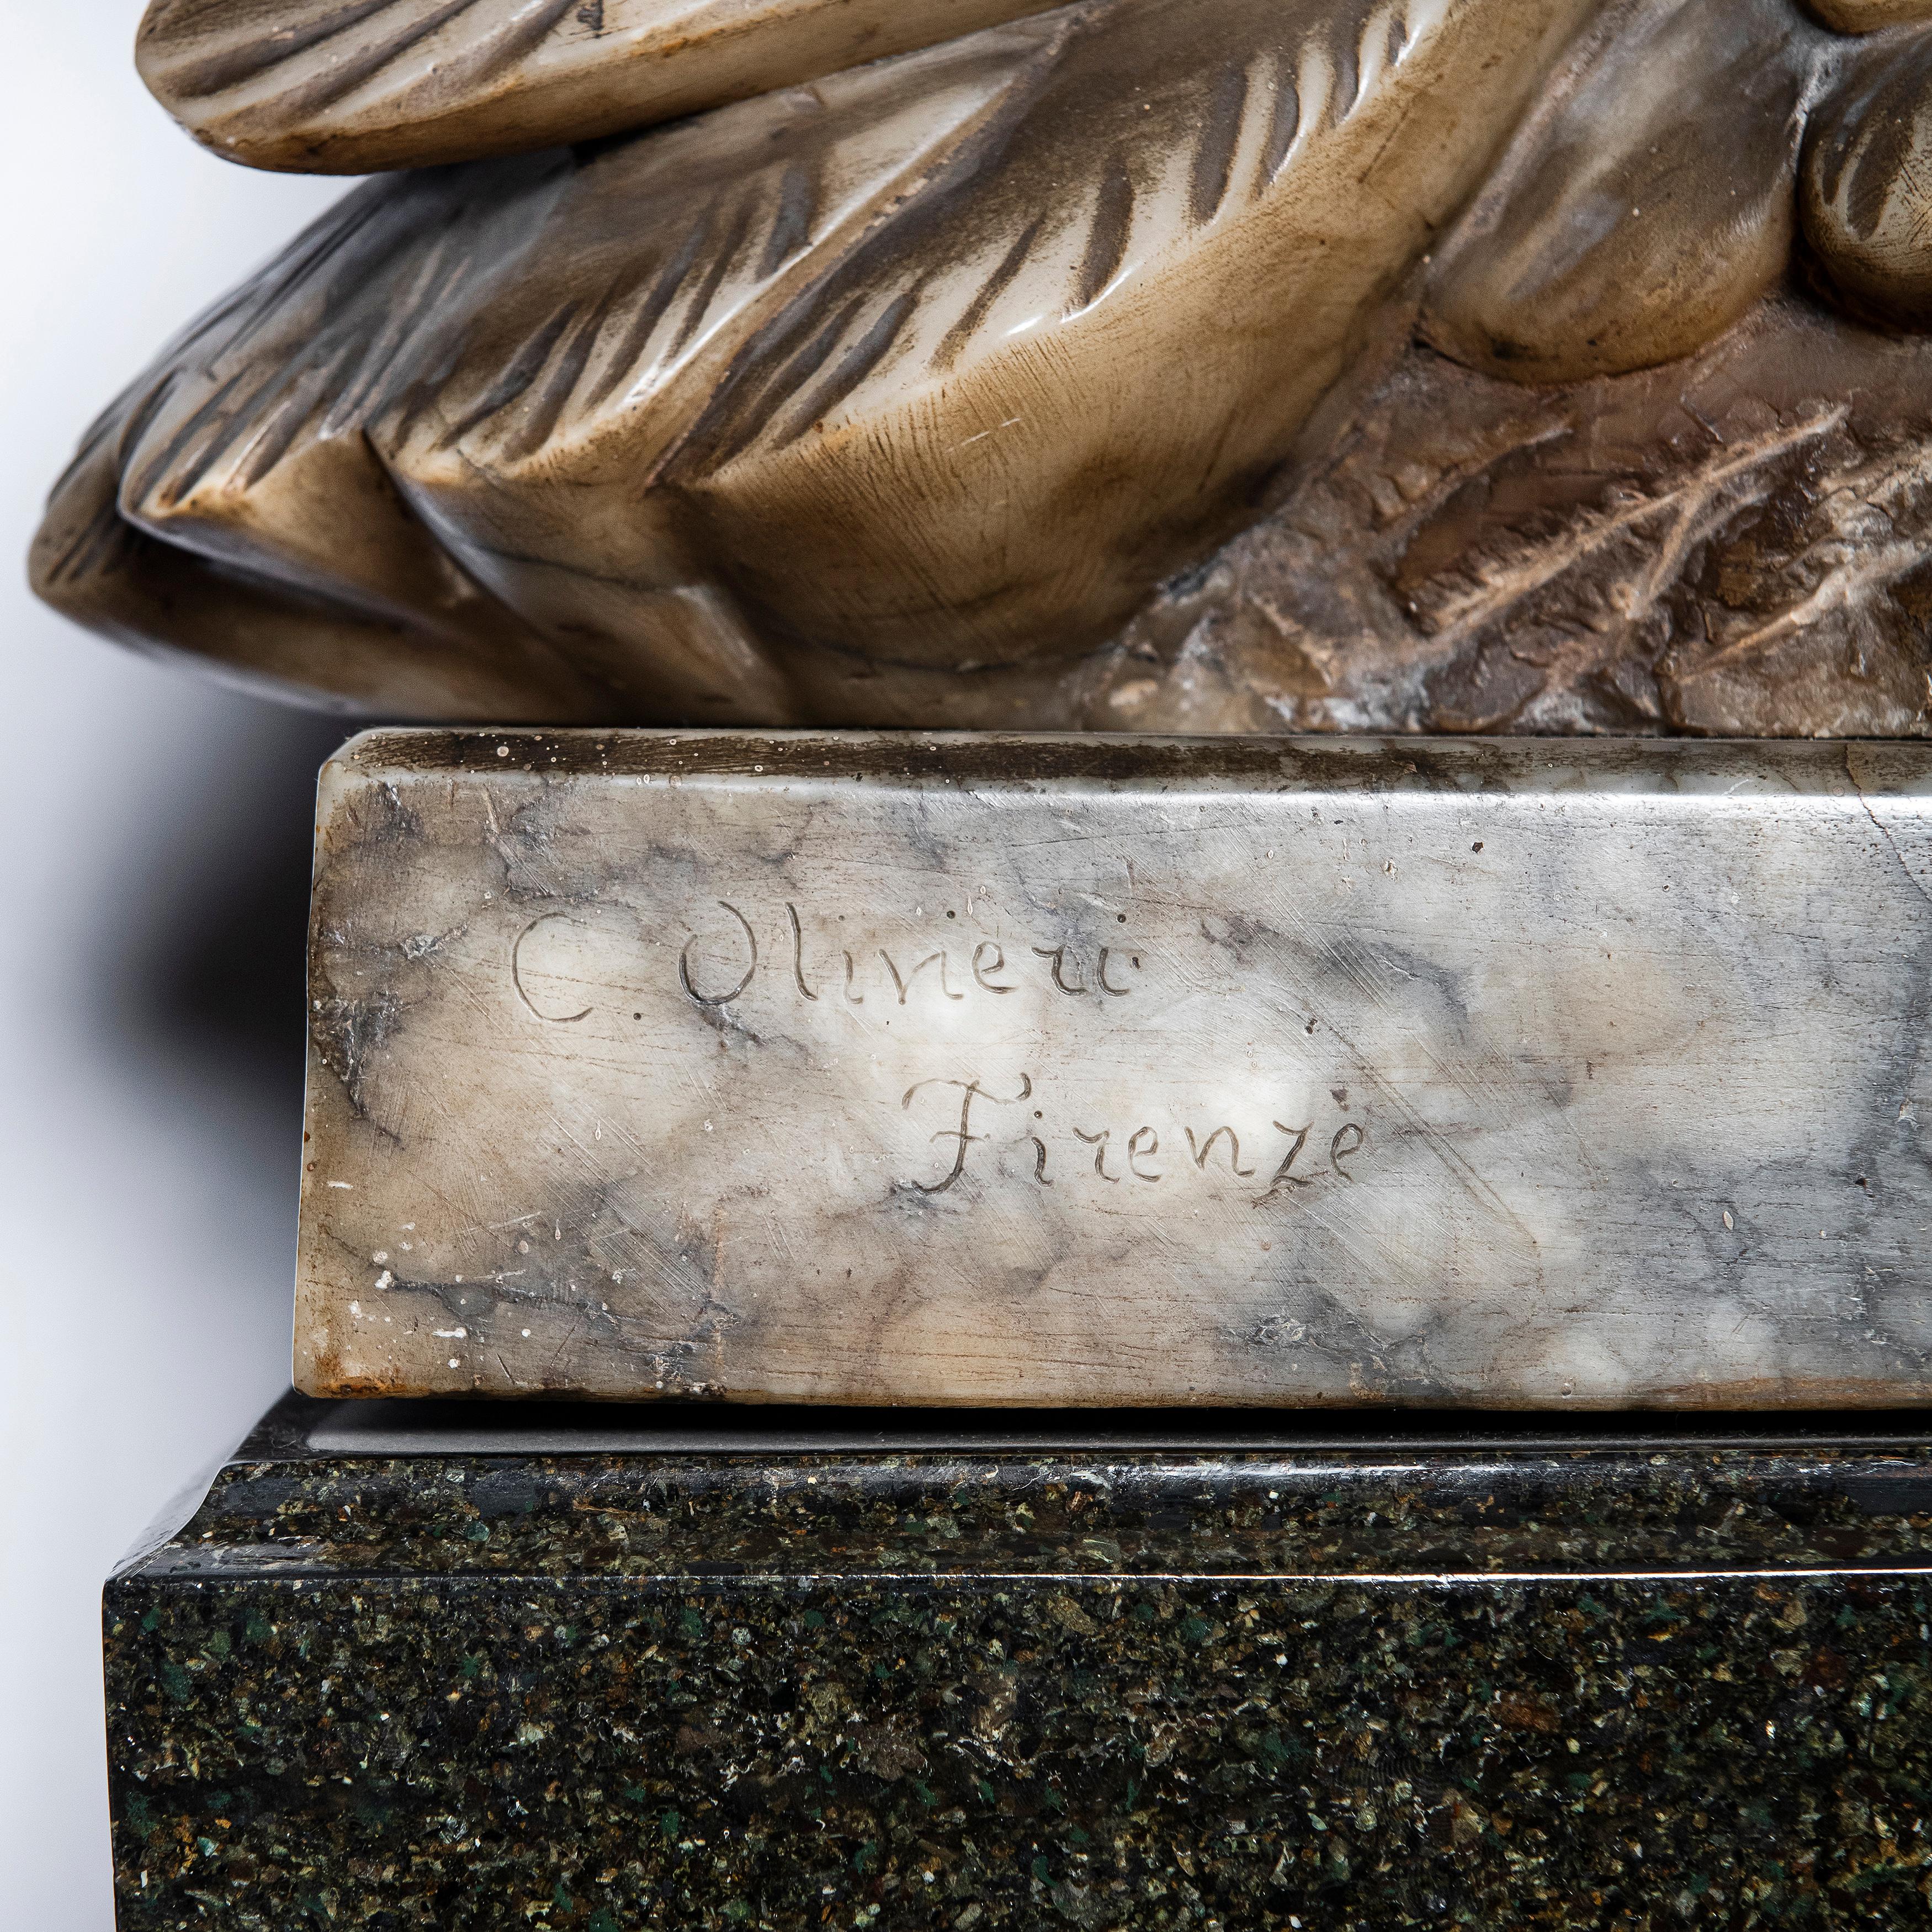 Italian Alabaster Sculpture Signed C. Olivieri with Marble Pedestal, Italy, circa 1900 For Sale